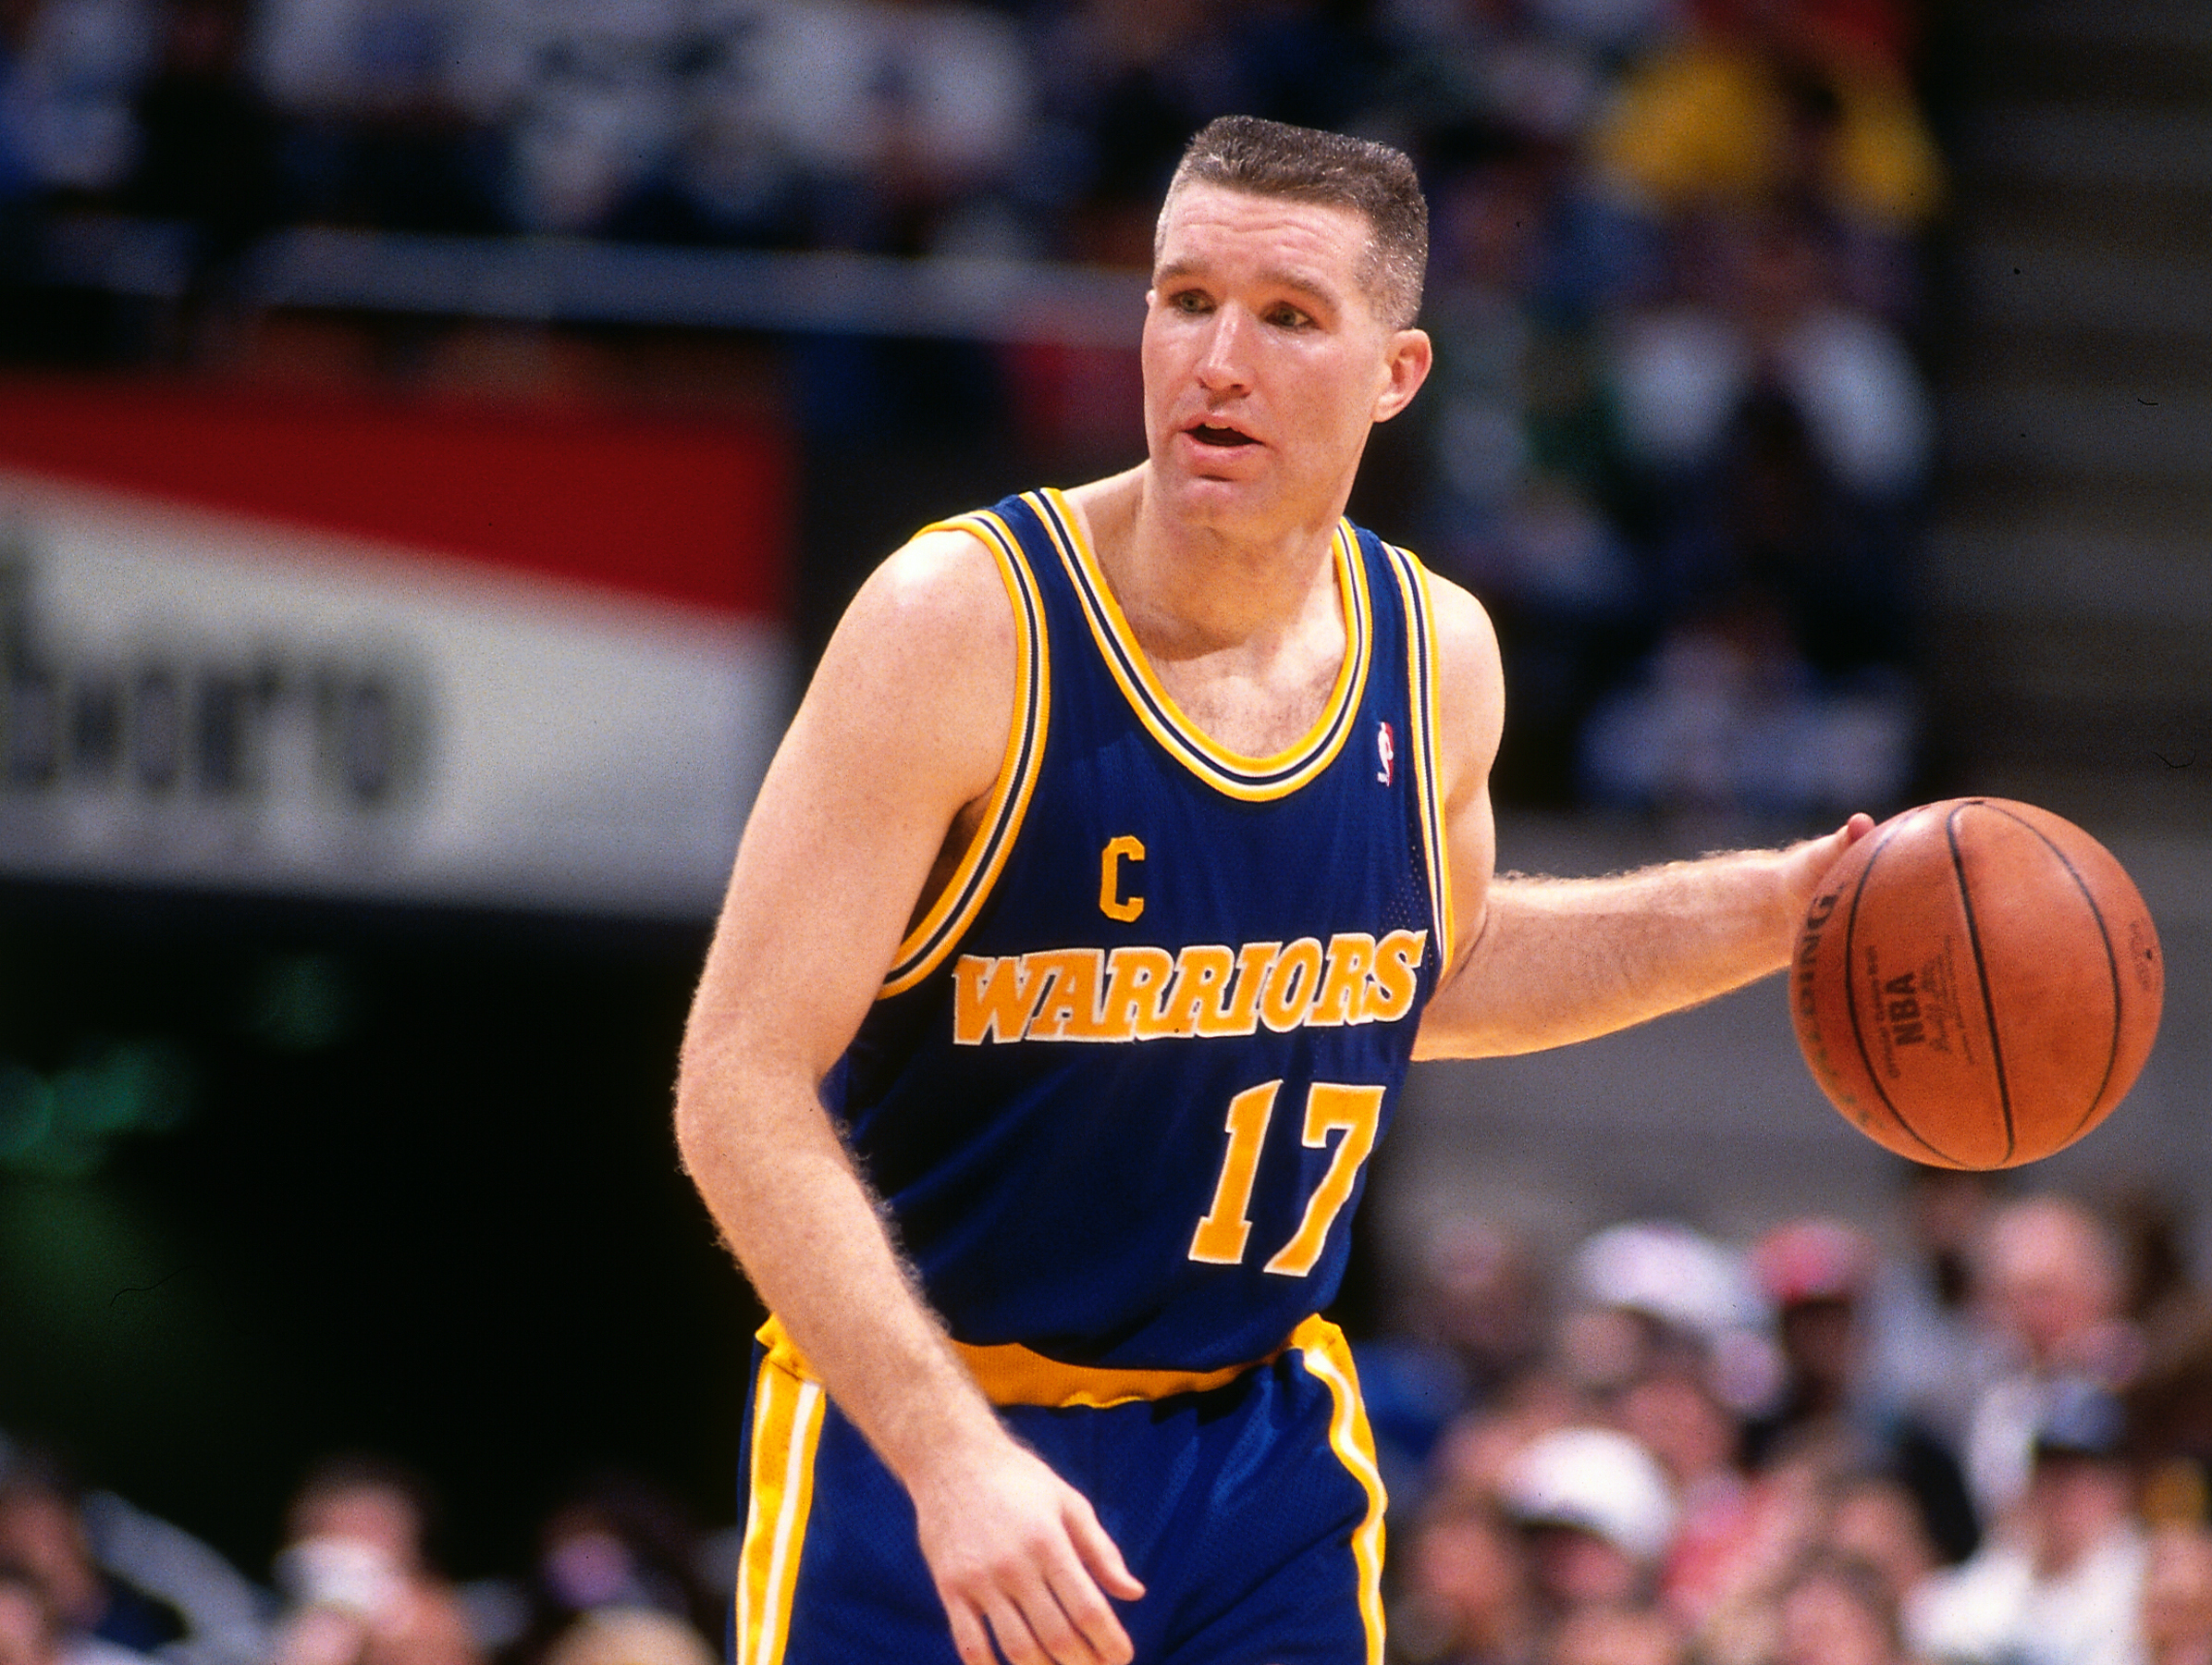 The NBA At 75: The Greatest Jerseys of All Time